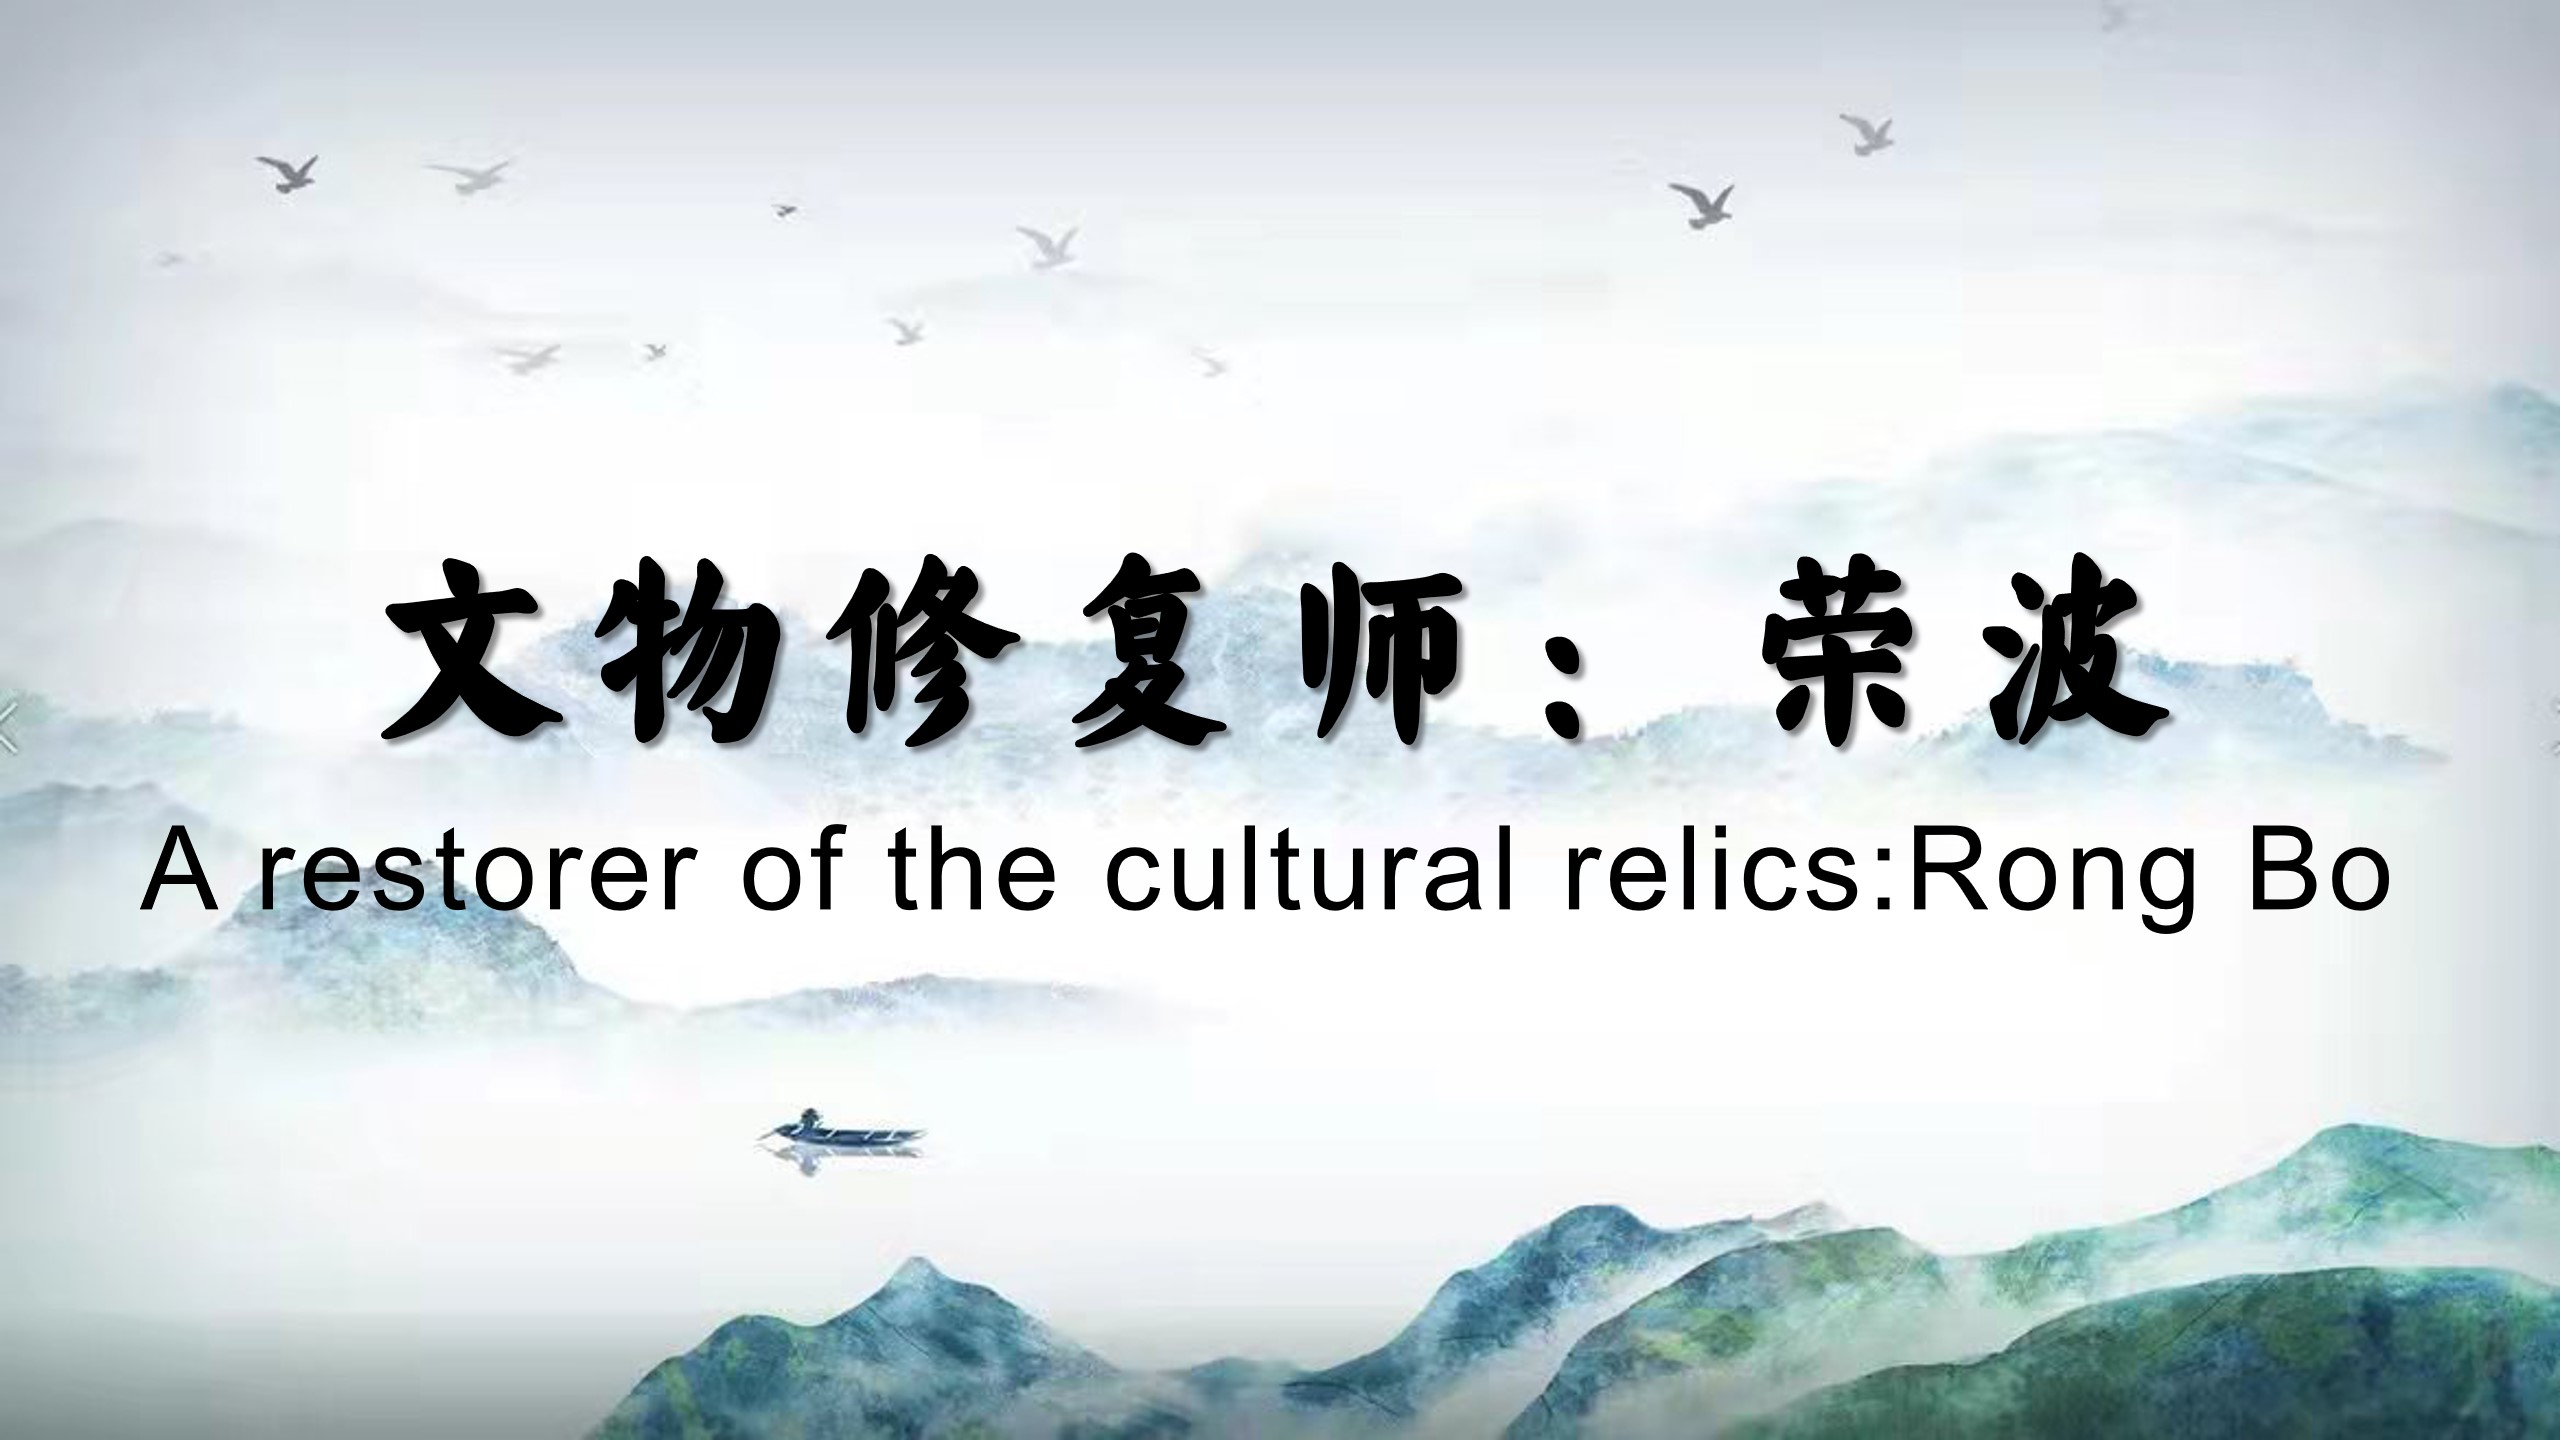 A restorer of the cultural relics:Rong Bo